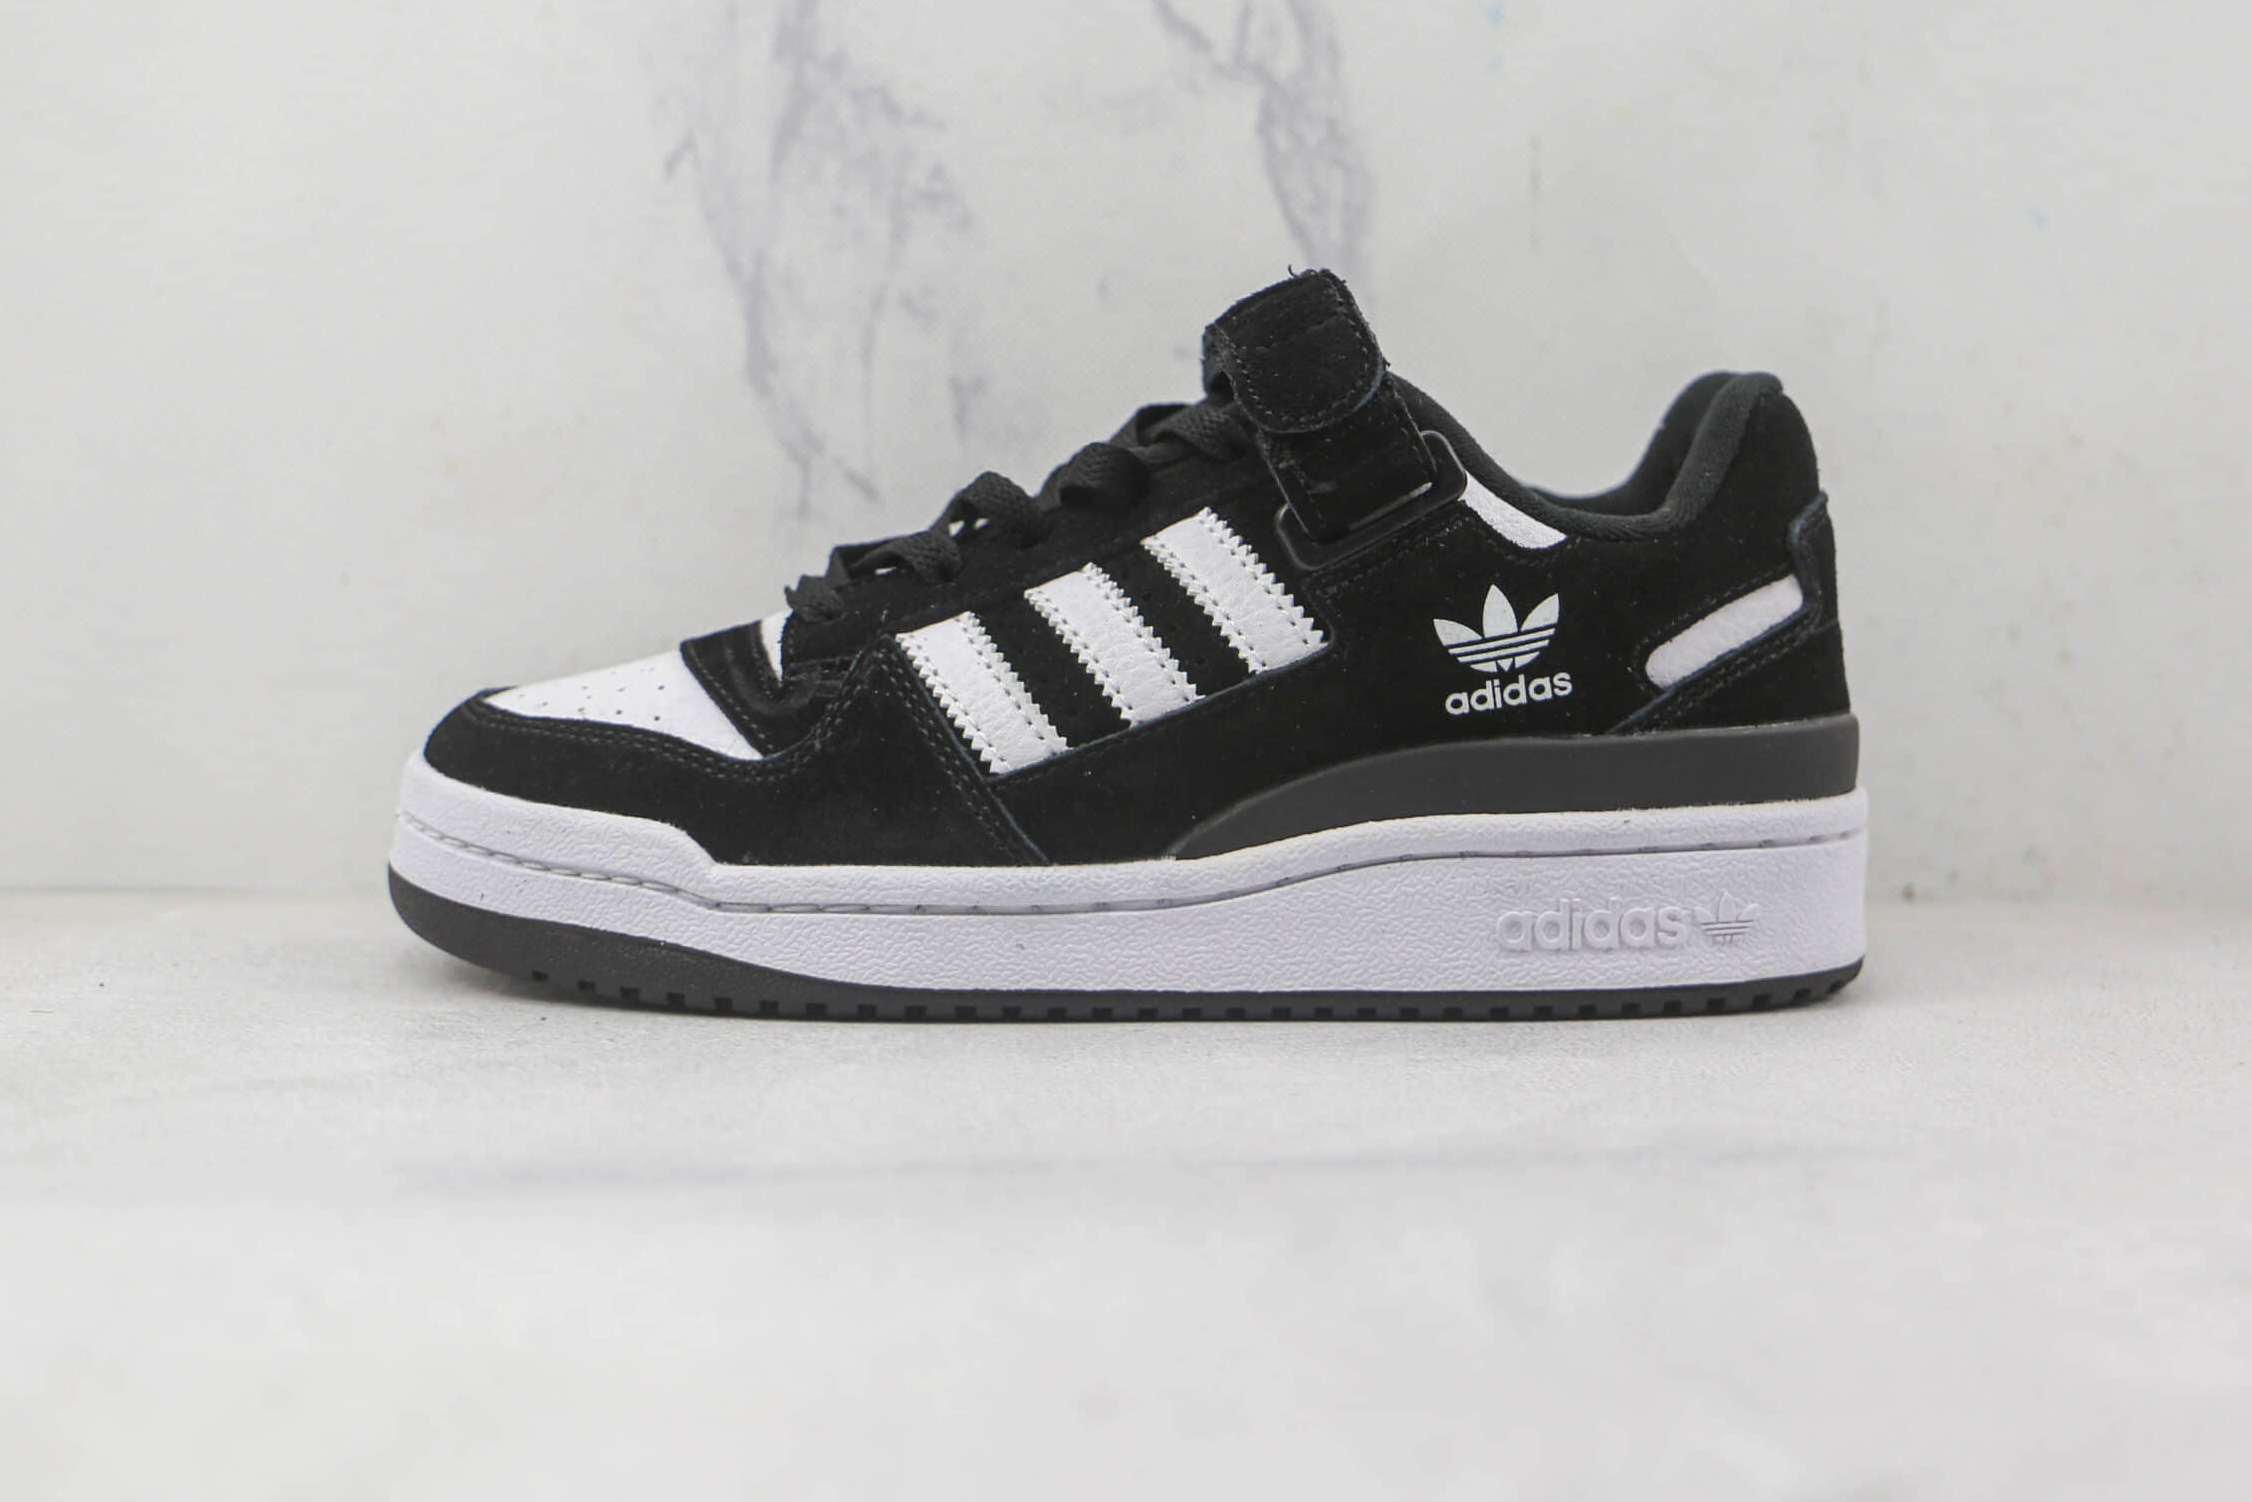 Adidas Forum Low 'Panda' GW0695 - Stylish and Iconic Sneakers | Free Shipping